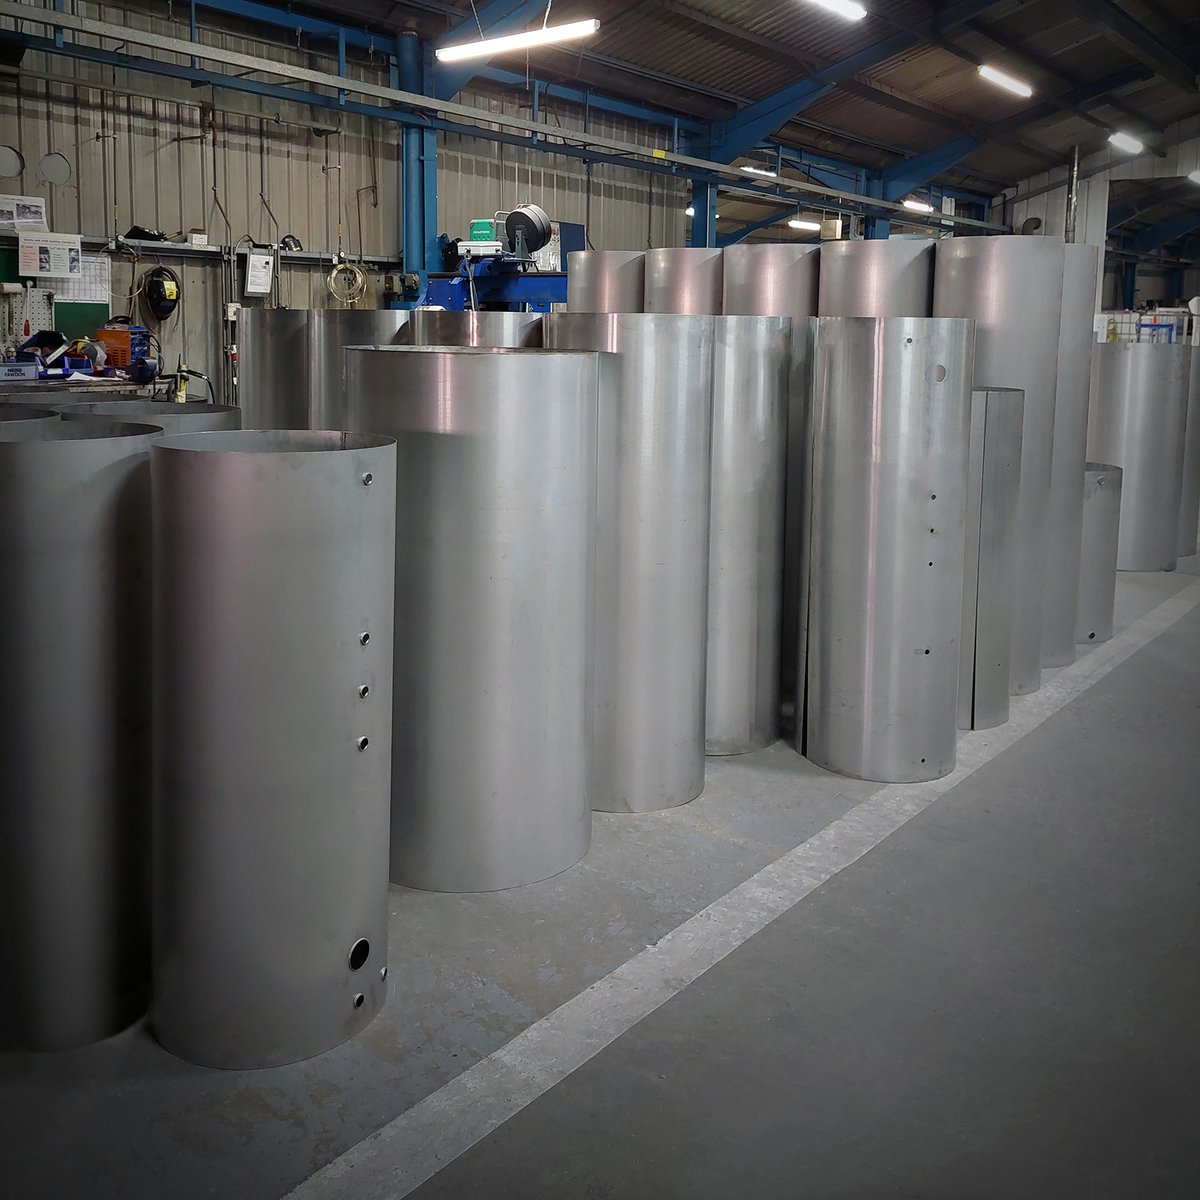 Who's ready for another week's water heater manufacturing? 

We are! As you can tell from these base cylinders on the production line, ready to become fully functional water heaters.

#manufacturemonday #fabdec #excelsior #excelsiorwaterheating #waterheater #waterheaters #ukmfg